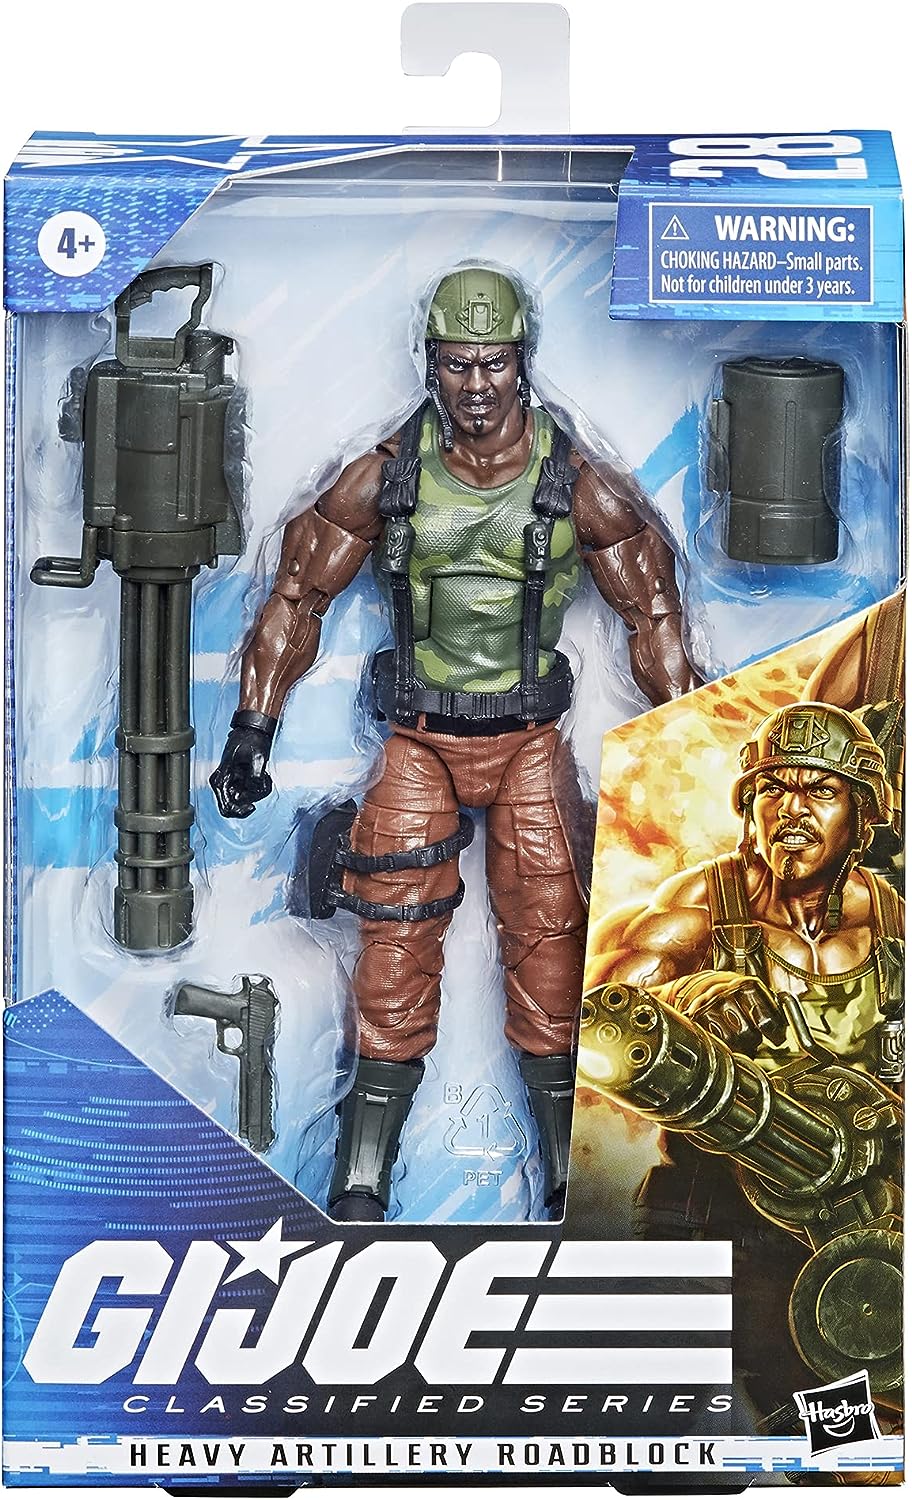 G.I. Joe Classified Series Heavy Artilery Roadblock Action Figure 28 Collectible Premium Toy 6-Inch-Scale with Custom Package Art (Amazon Exclusive)